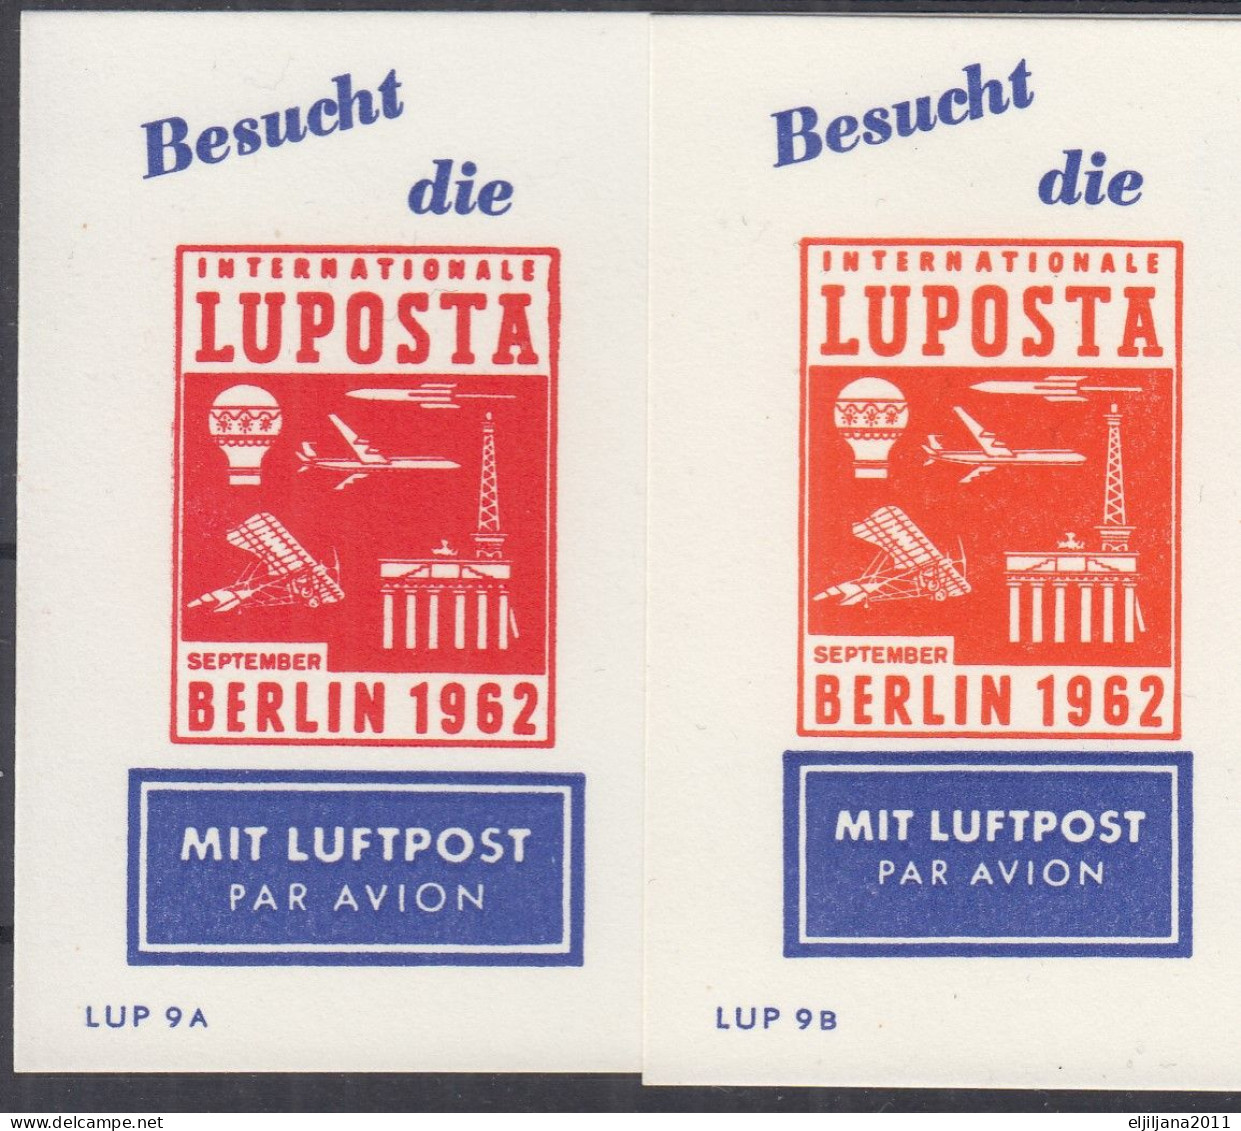 Action !! SALE !! 50 % OFF !! ⁕ Germany BERLIN 1962 ⁕ LUPOSTA exhibition airmail Mi.140, 145, 147 ⁕ 2v postcard